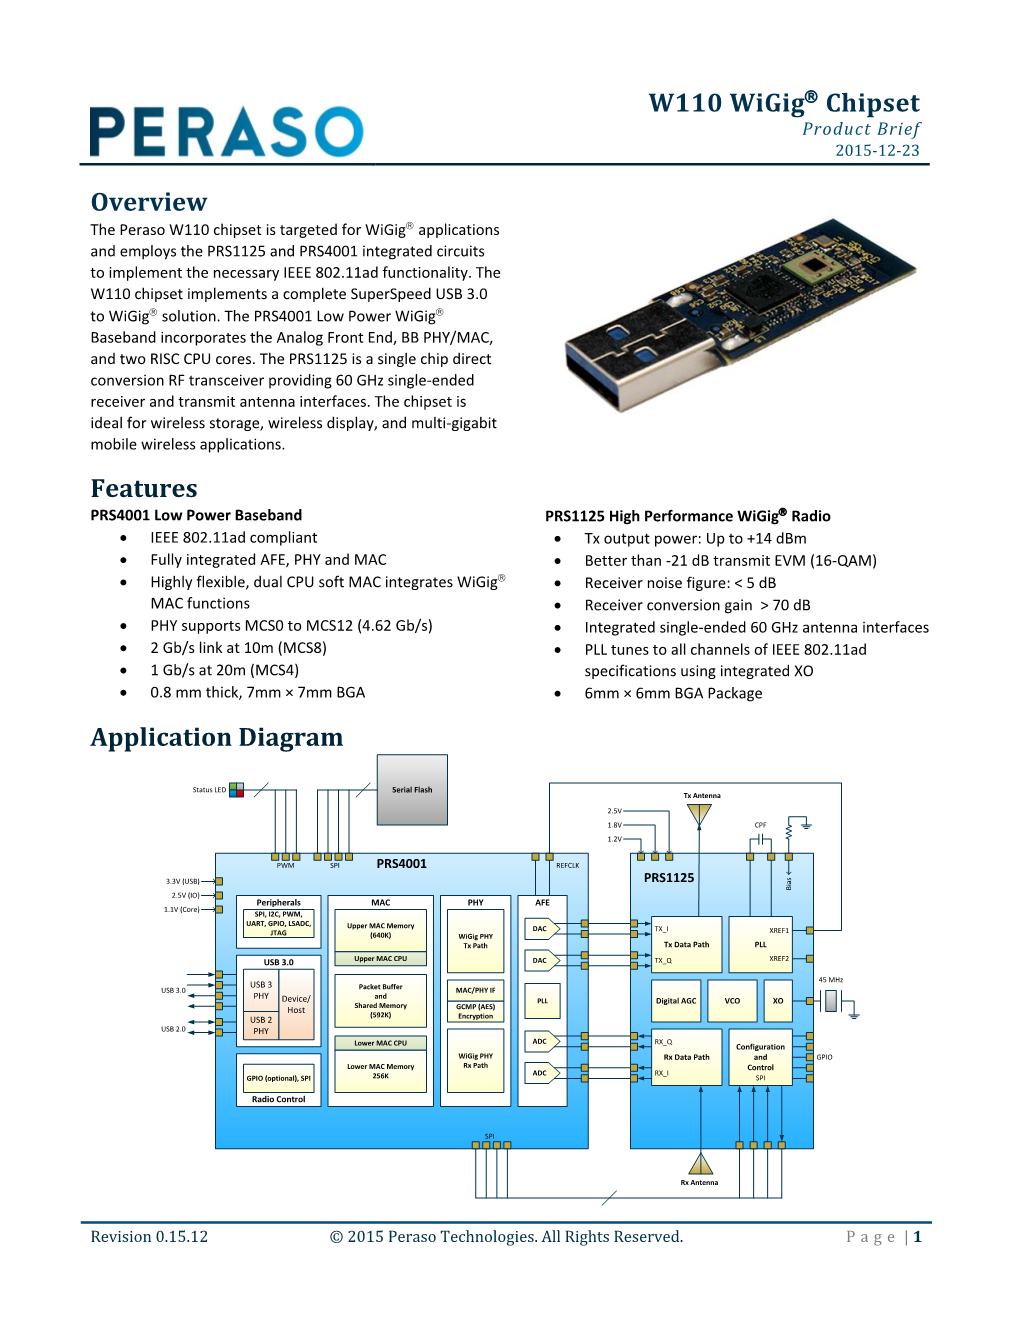 W110 Wigig® Chipset Overview Features Application Diagram